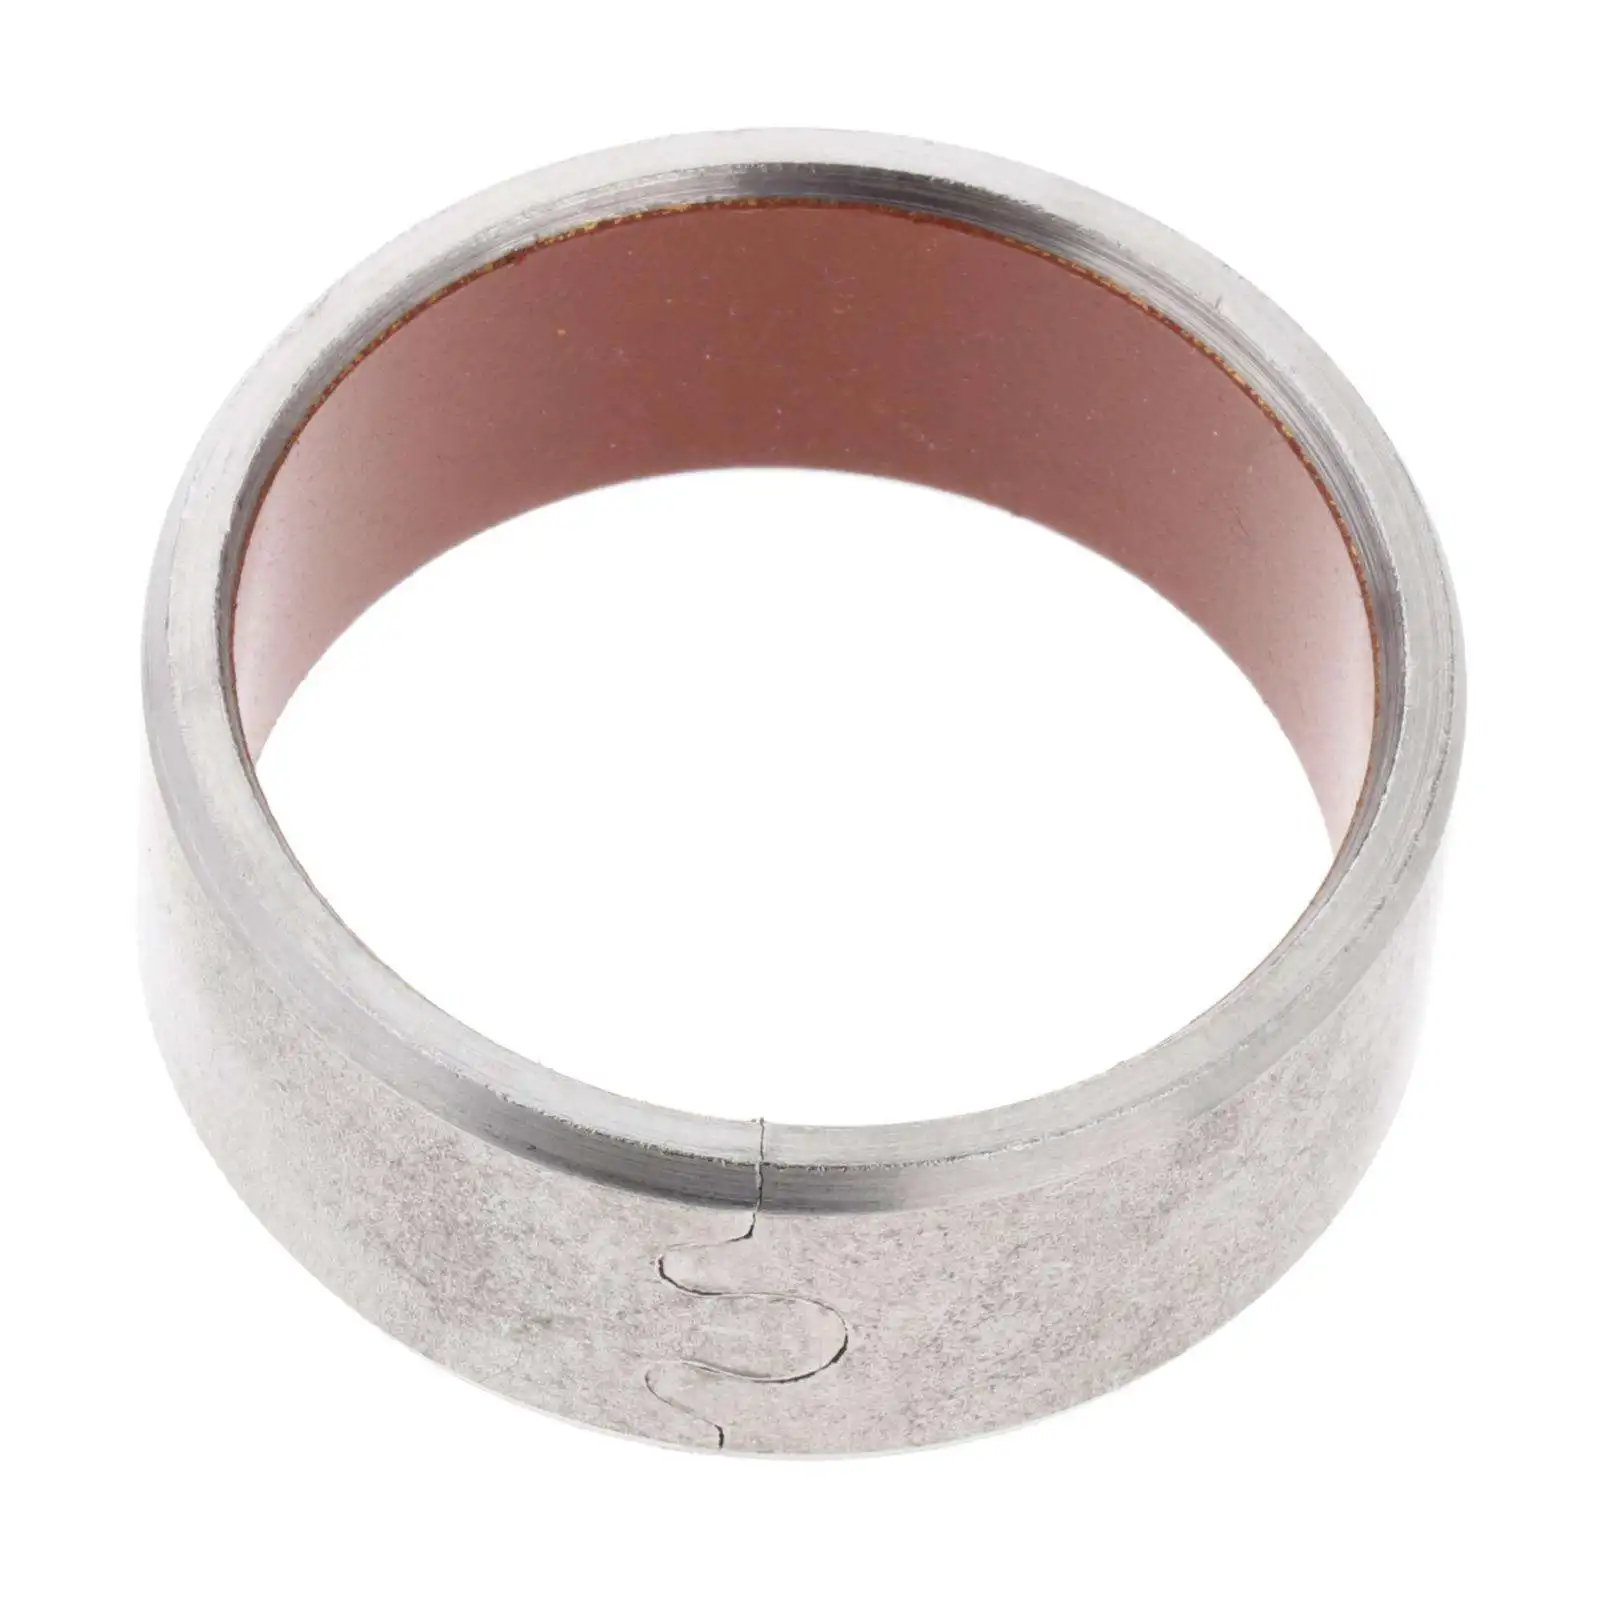 Transmission Bearing Wear Resistance CV6P-7E110AC Fit for Ford Mondeo 2.0 Replacement Parts